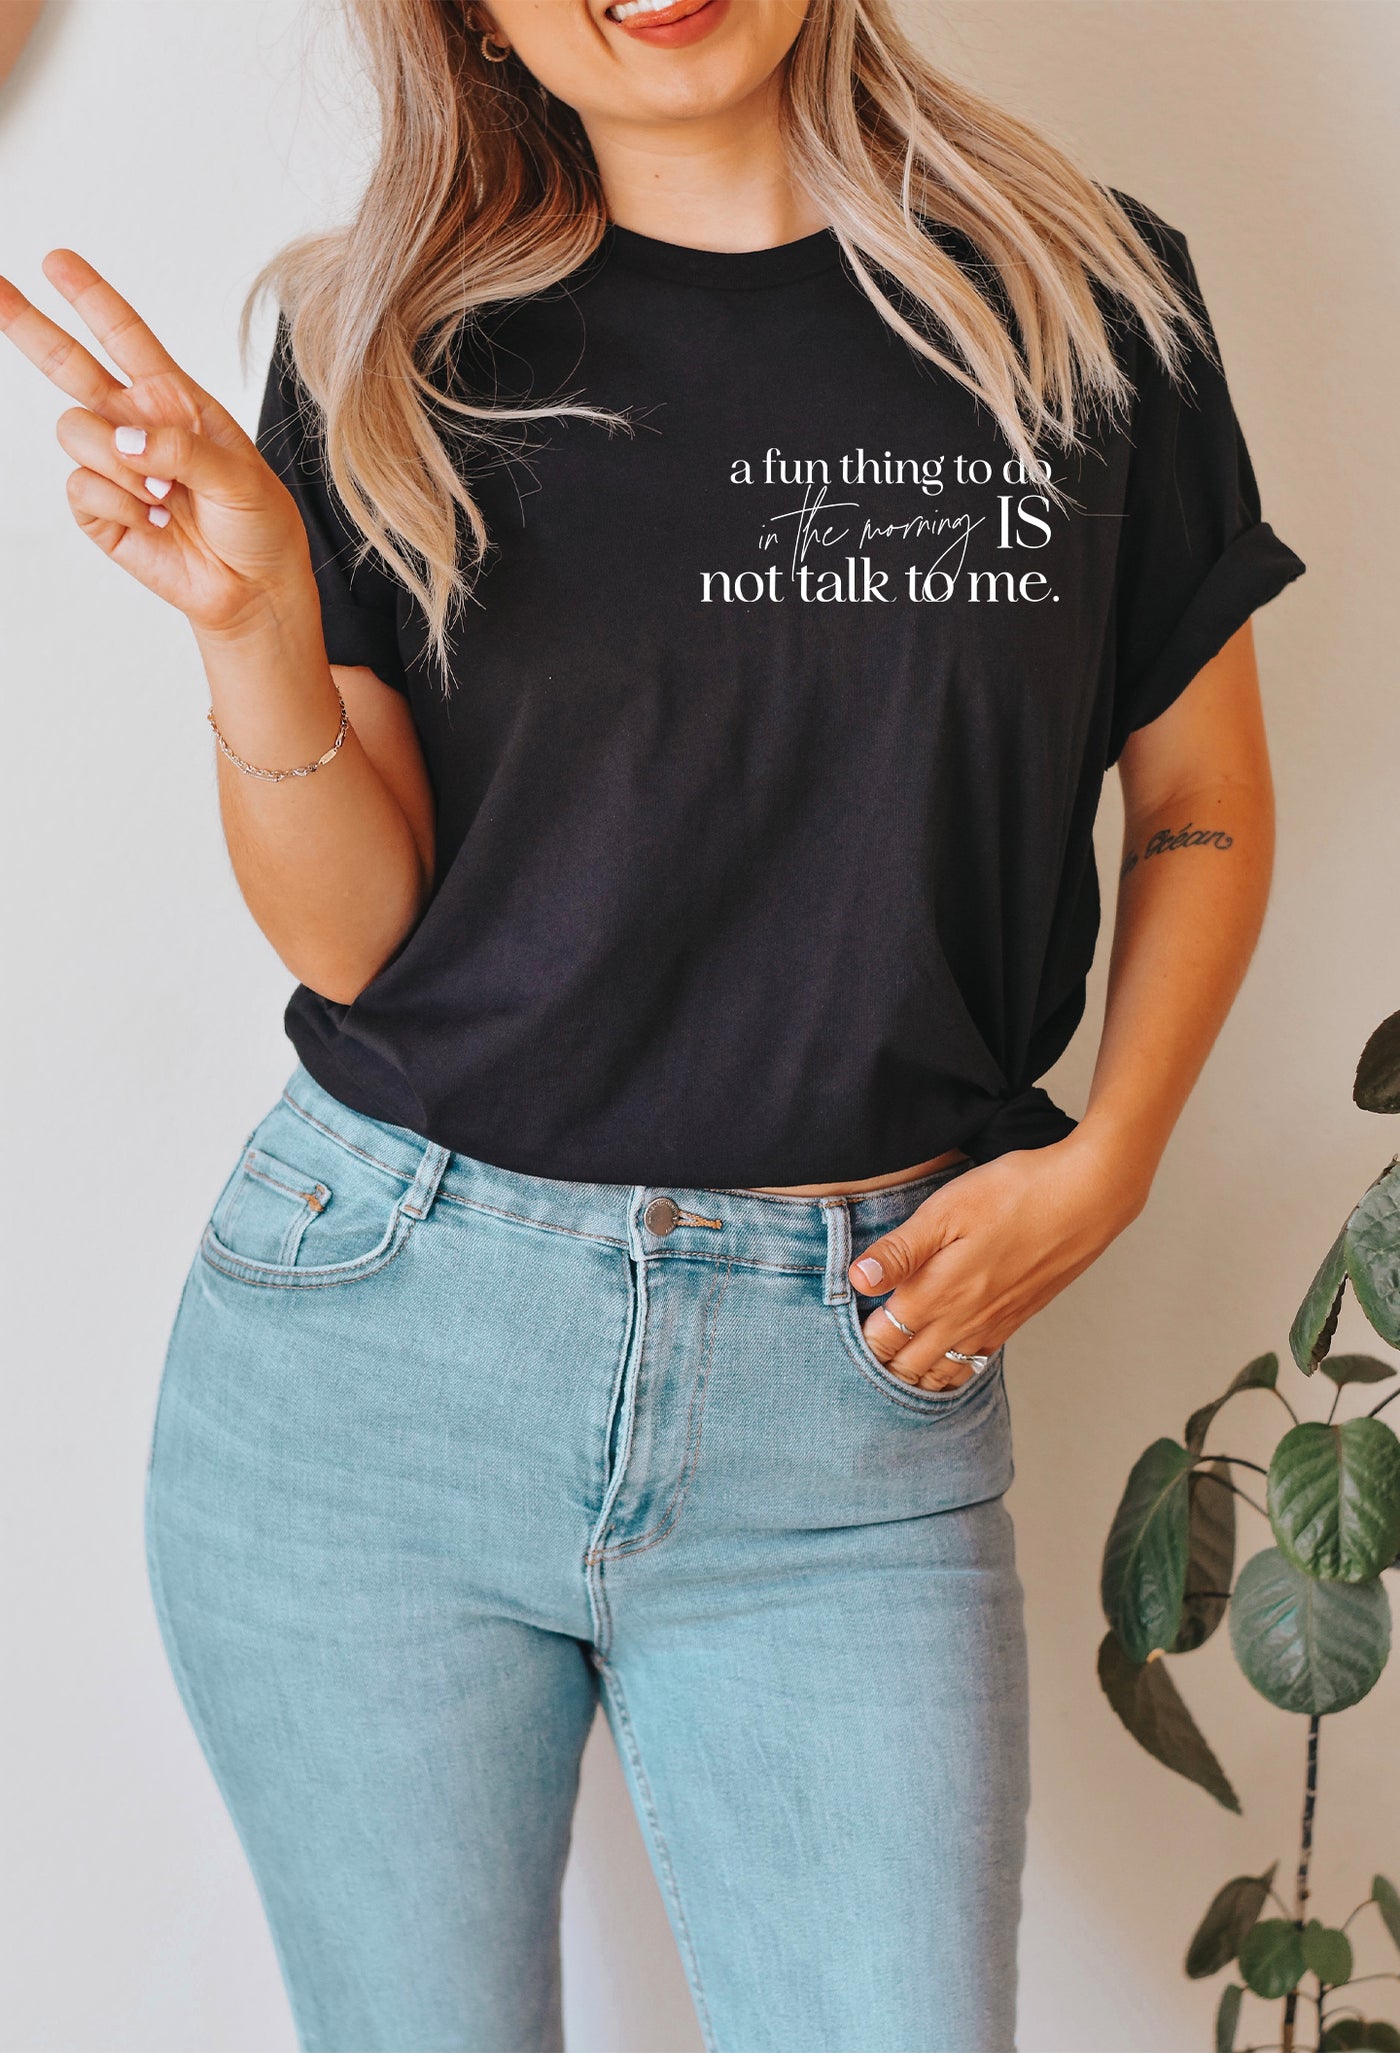 A Fun Thing To Do In the Morning Is Not Talk To Me Tee